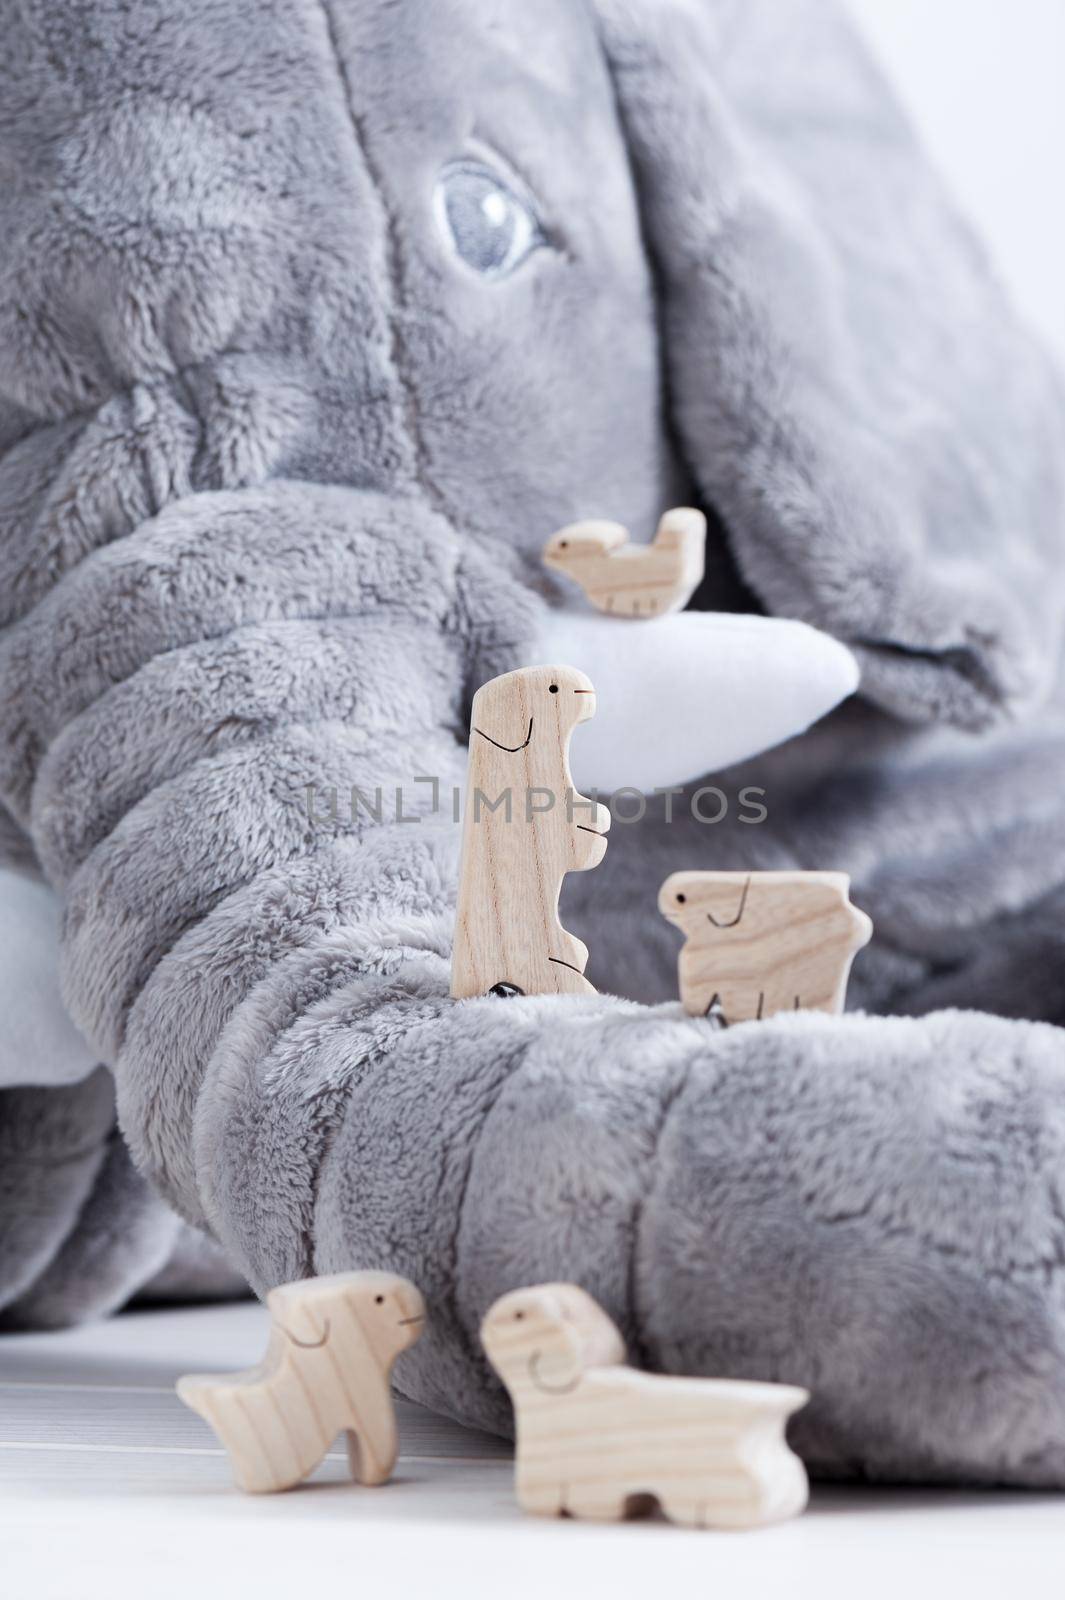 cute wooden toy animals on white wood plank with giant elephant doll in the background, tiny toys and shallow depth of field